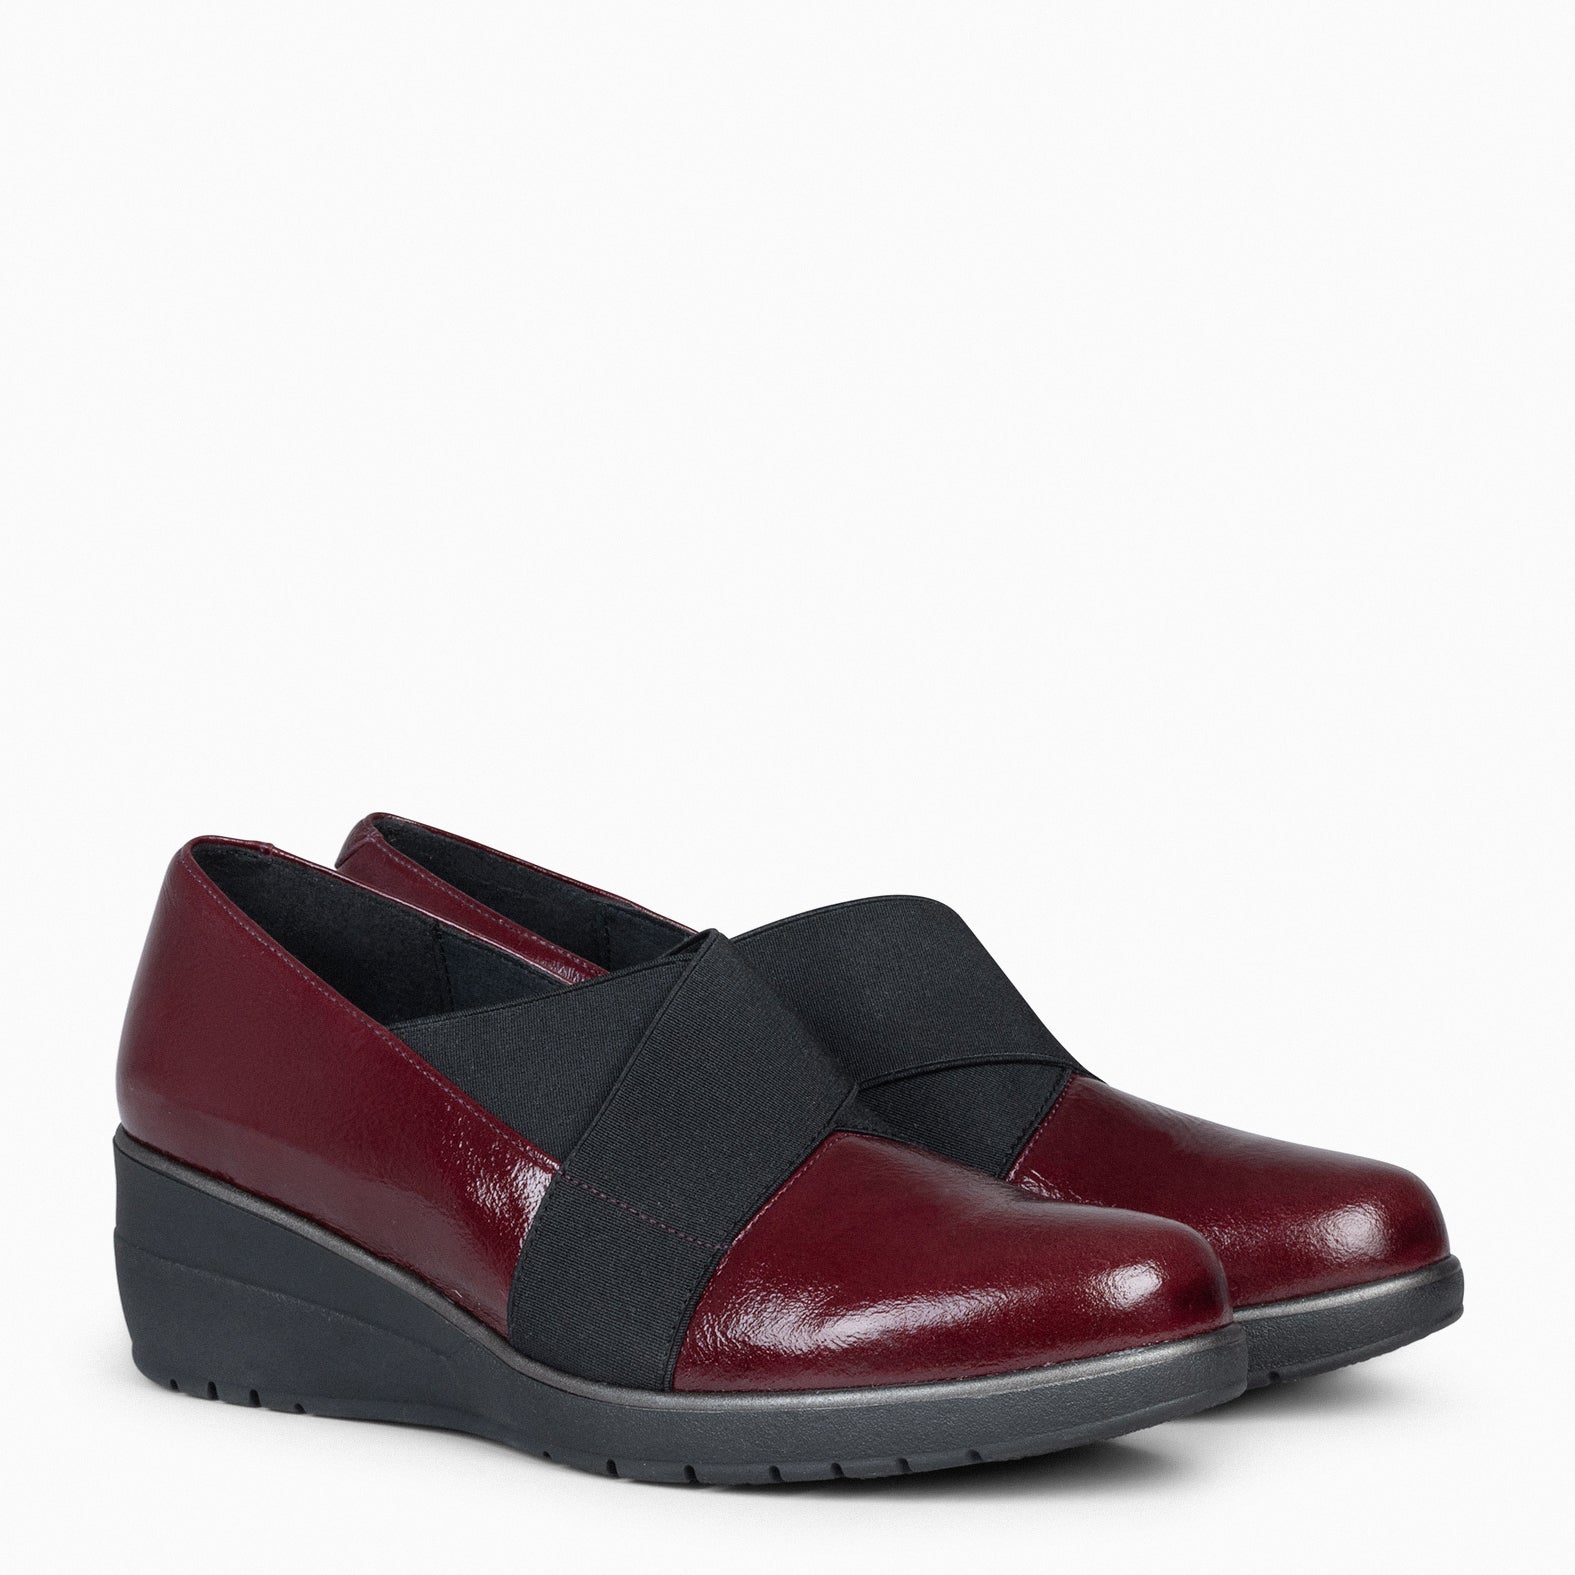 LIA - BURGUNDY Wedge shoes with elastic straps 